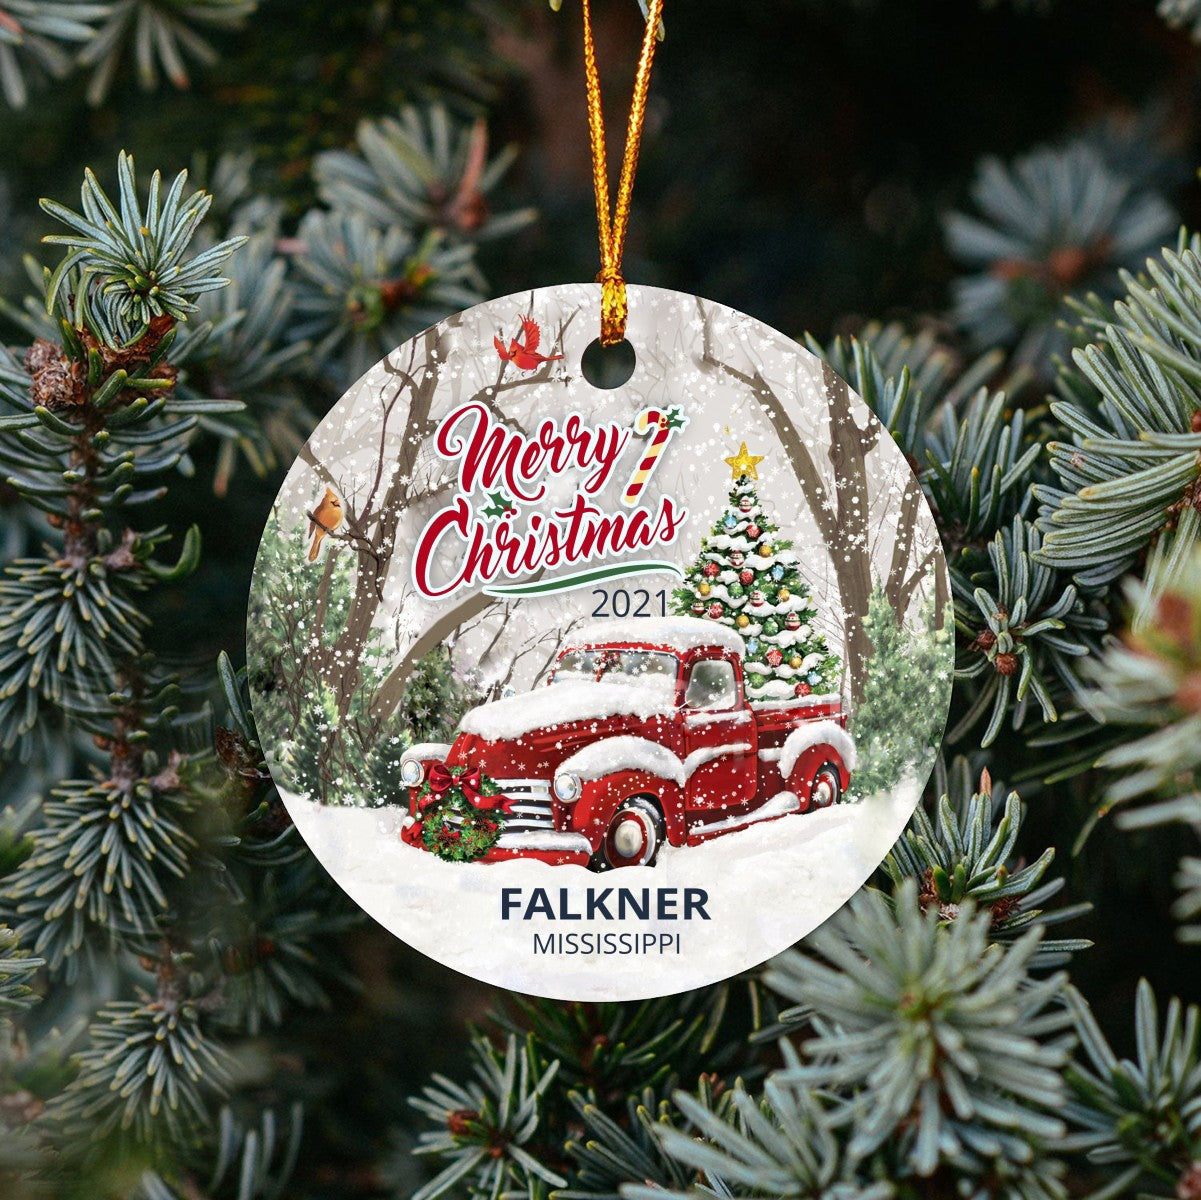 Christmas Tree Ornaments Falkner - Ornament With Name City, State Falkner Mississippi MS Ornament - Red Truck Xmas Ornaments 3'' Plastic Gift For Family, Friend And Housewarming